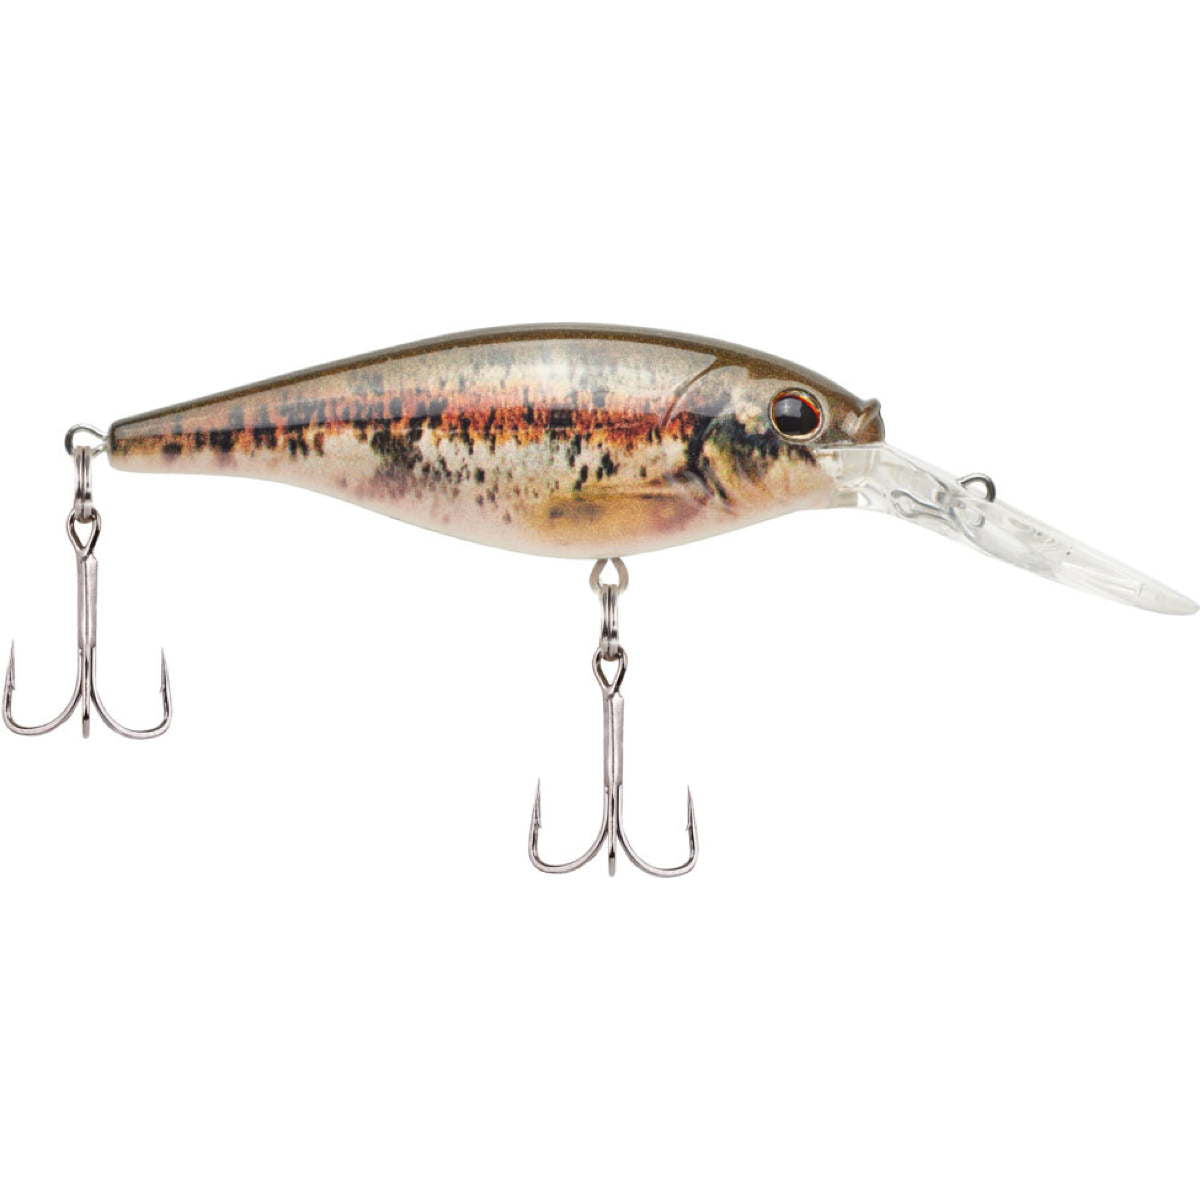 Photo of Berkley Flicker Shad - Large for sale at United Tackle Shops.